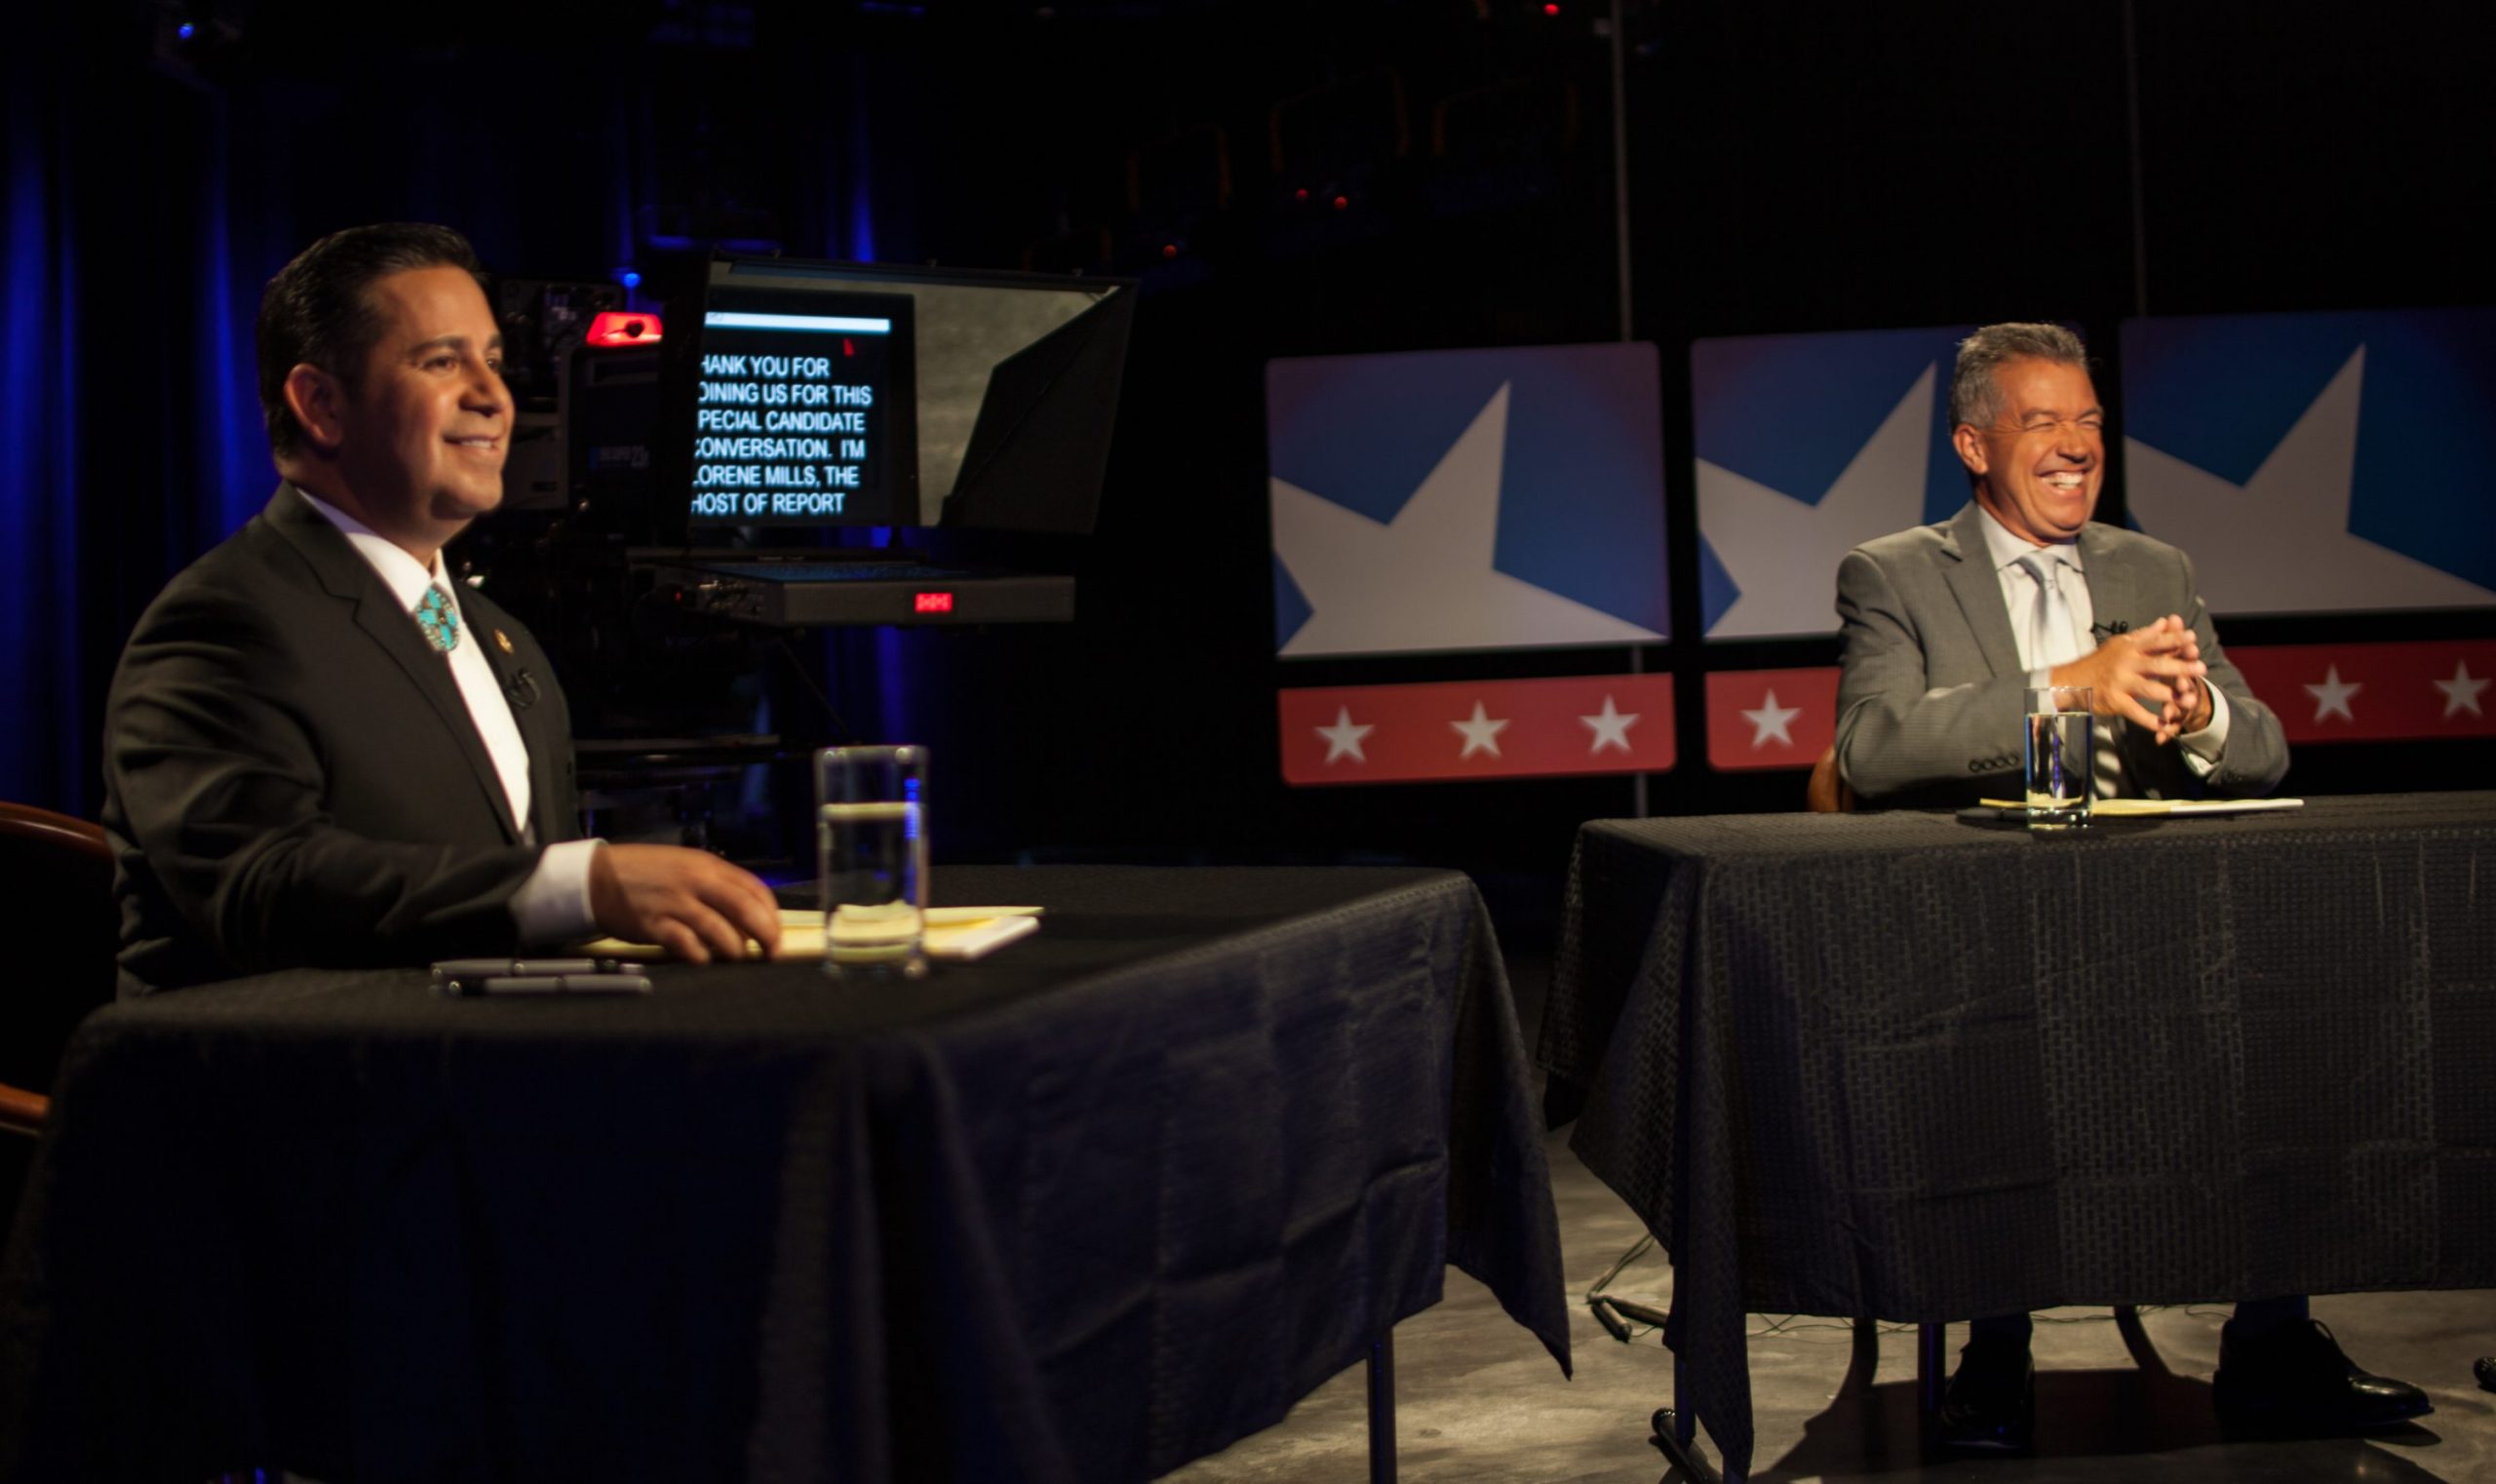 Preparing to debate on NMPBS: Ben Ray Luhan (L) and Michael Romero (R). Photo by Kevin Maestas / NM News Port